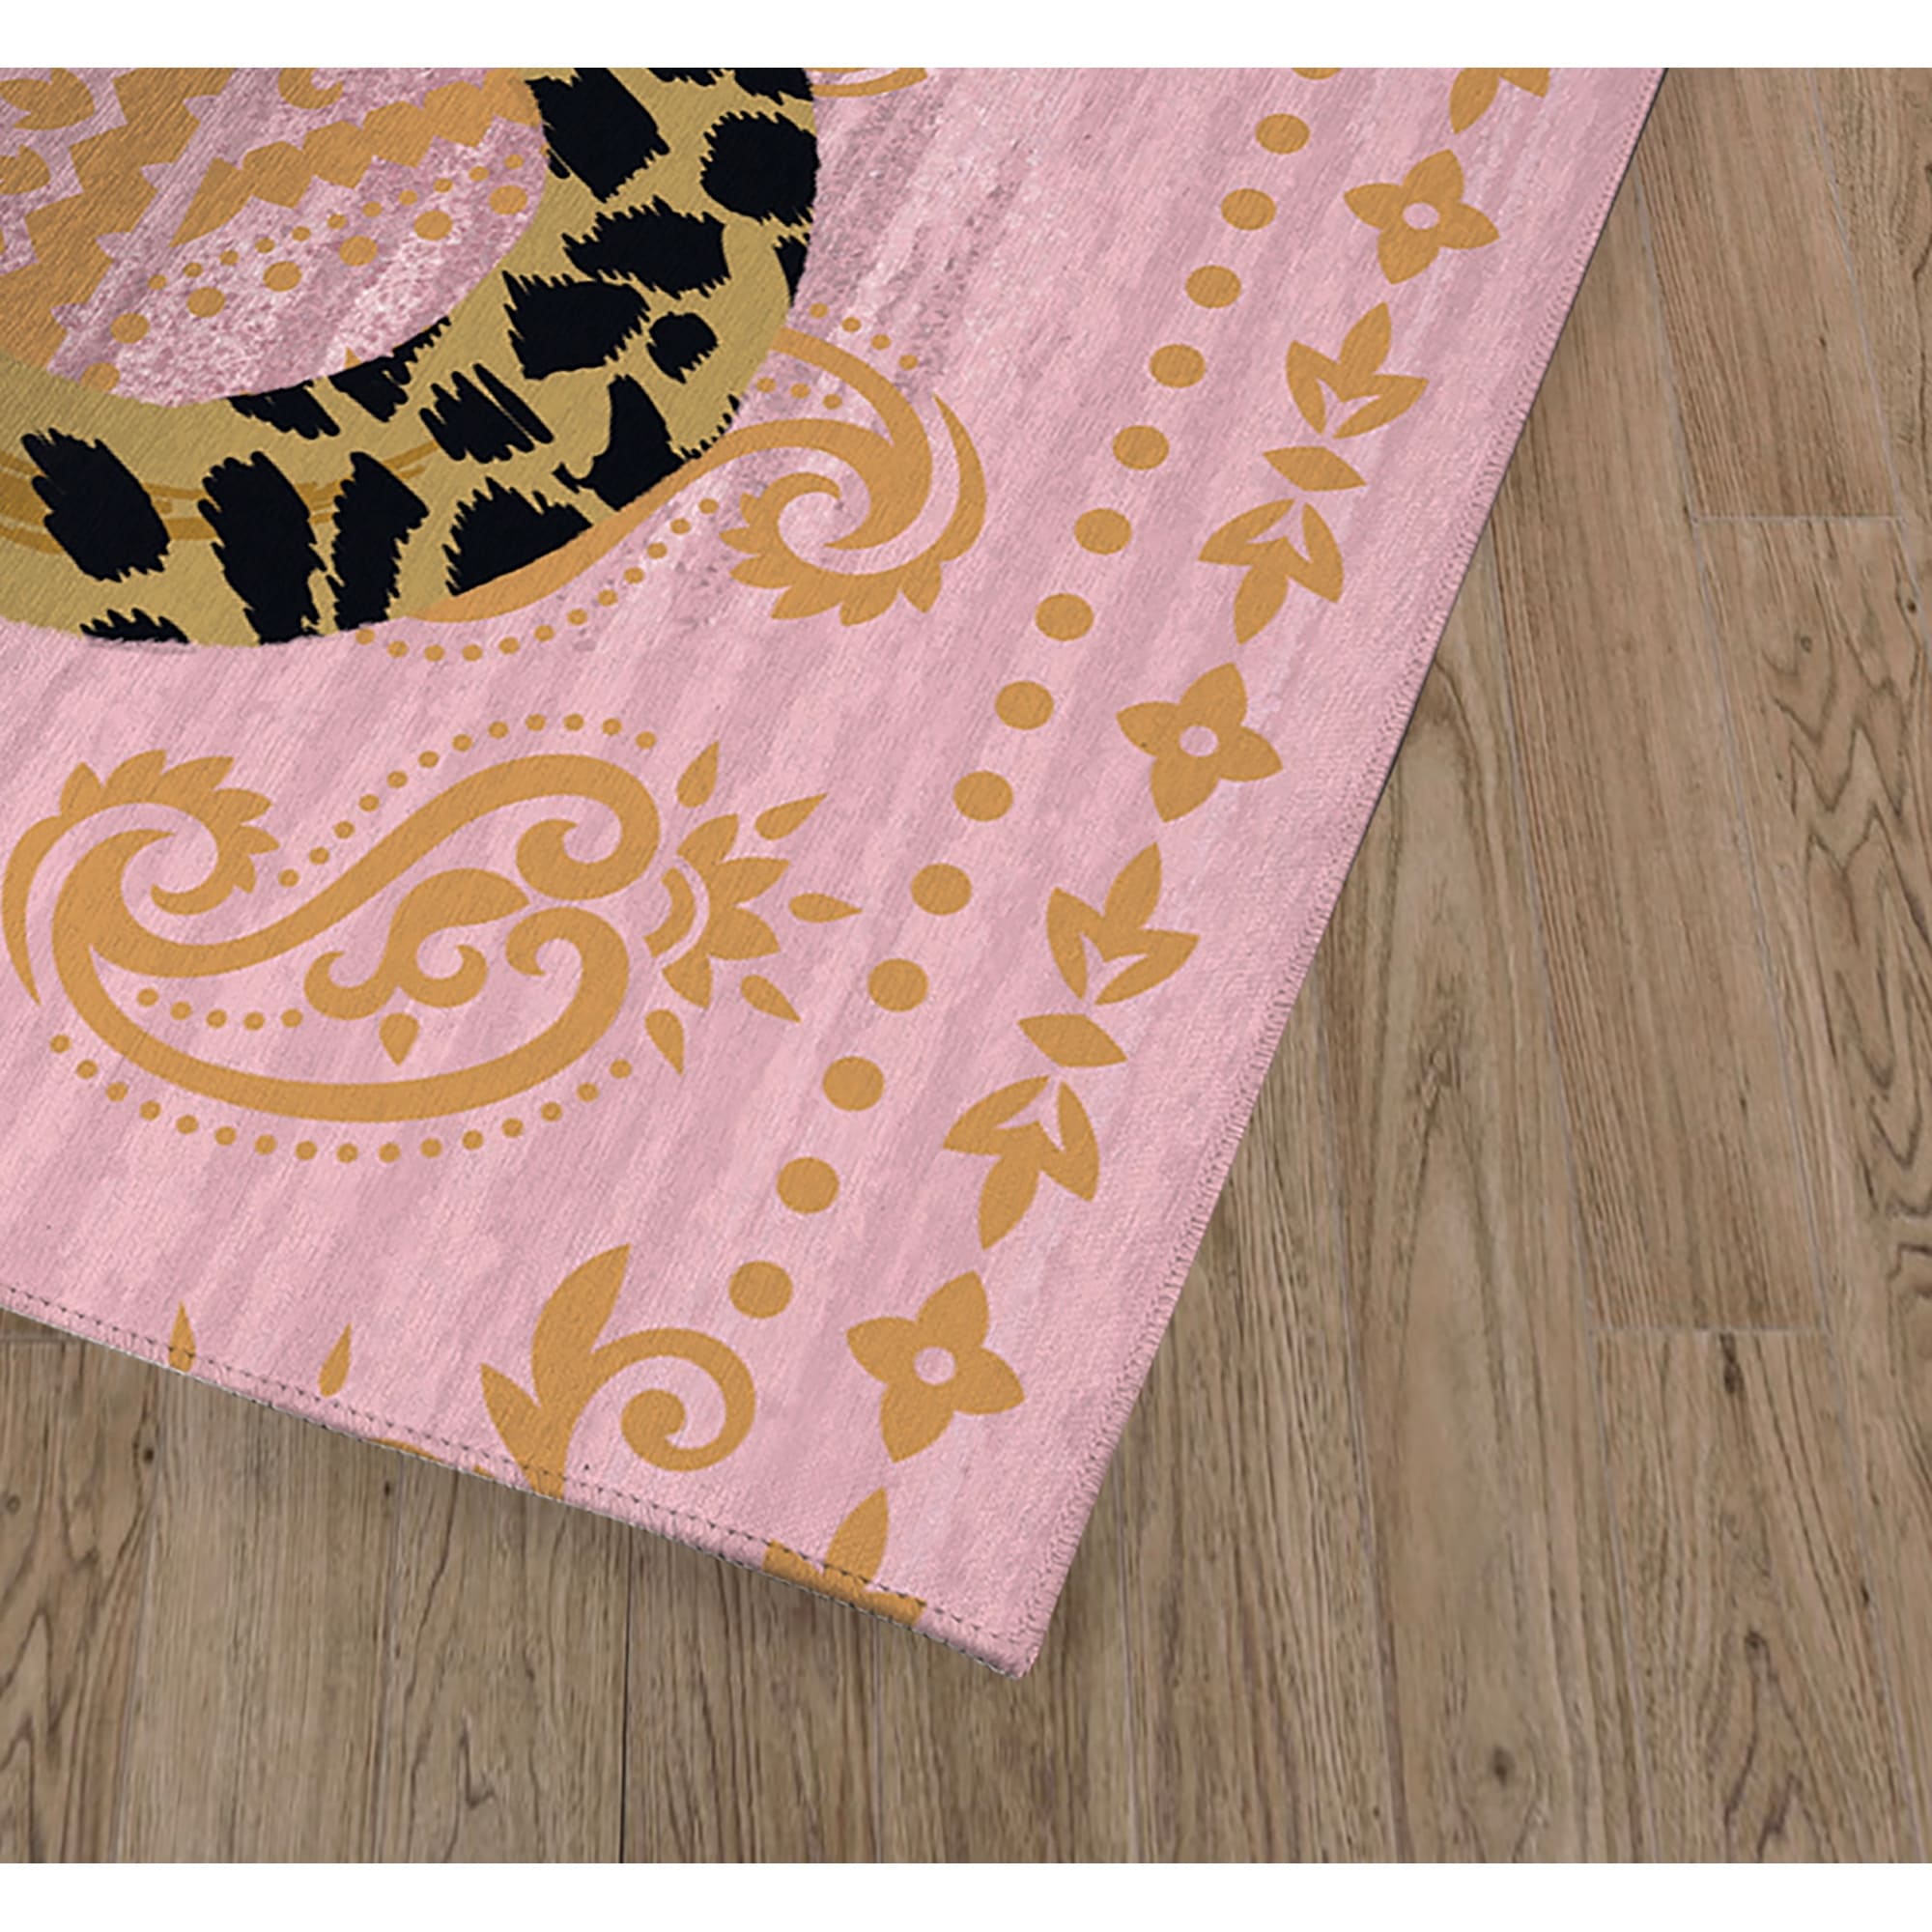 https://ak1.ostkcdn.com/images/products/is/images/direct/53e7f63e4817eece18d5d436c77903336cc729b8/LEOPARD-RUG-PINK-Area-Rug-By-Kavka-Designs.jpg